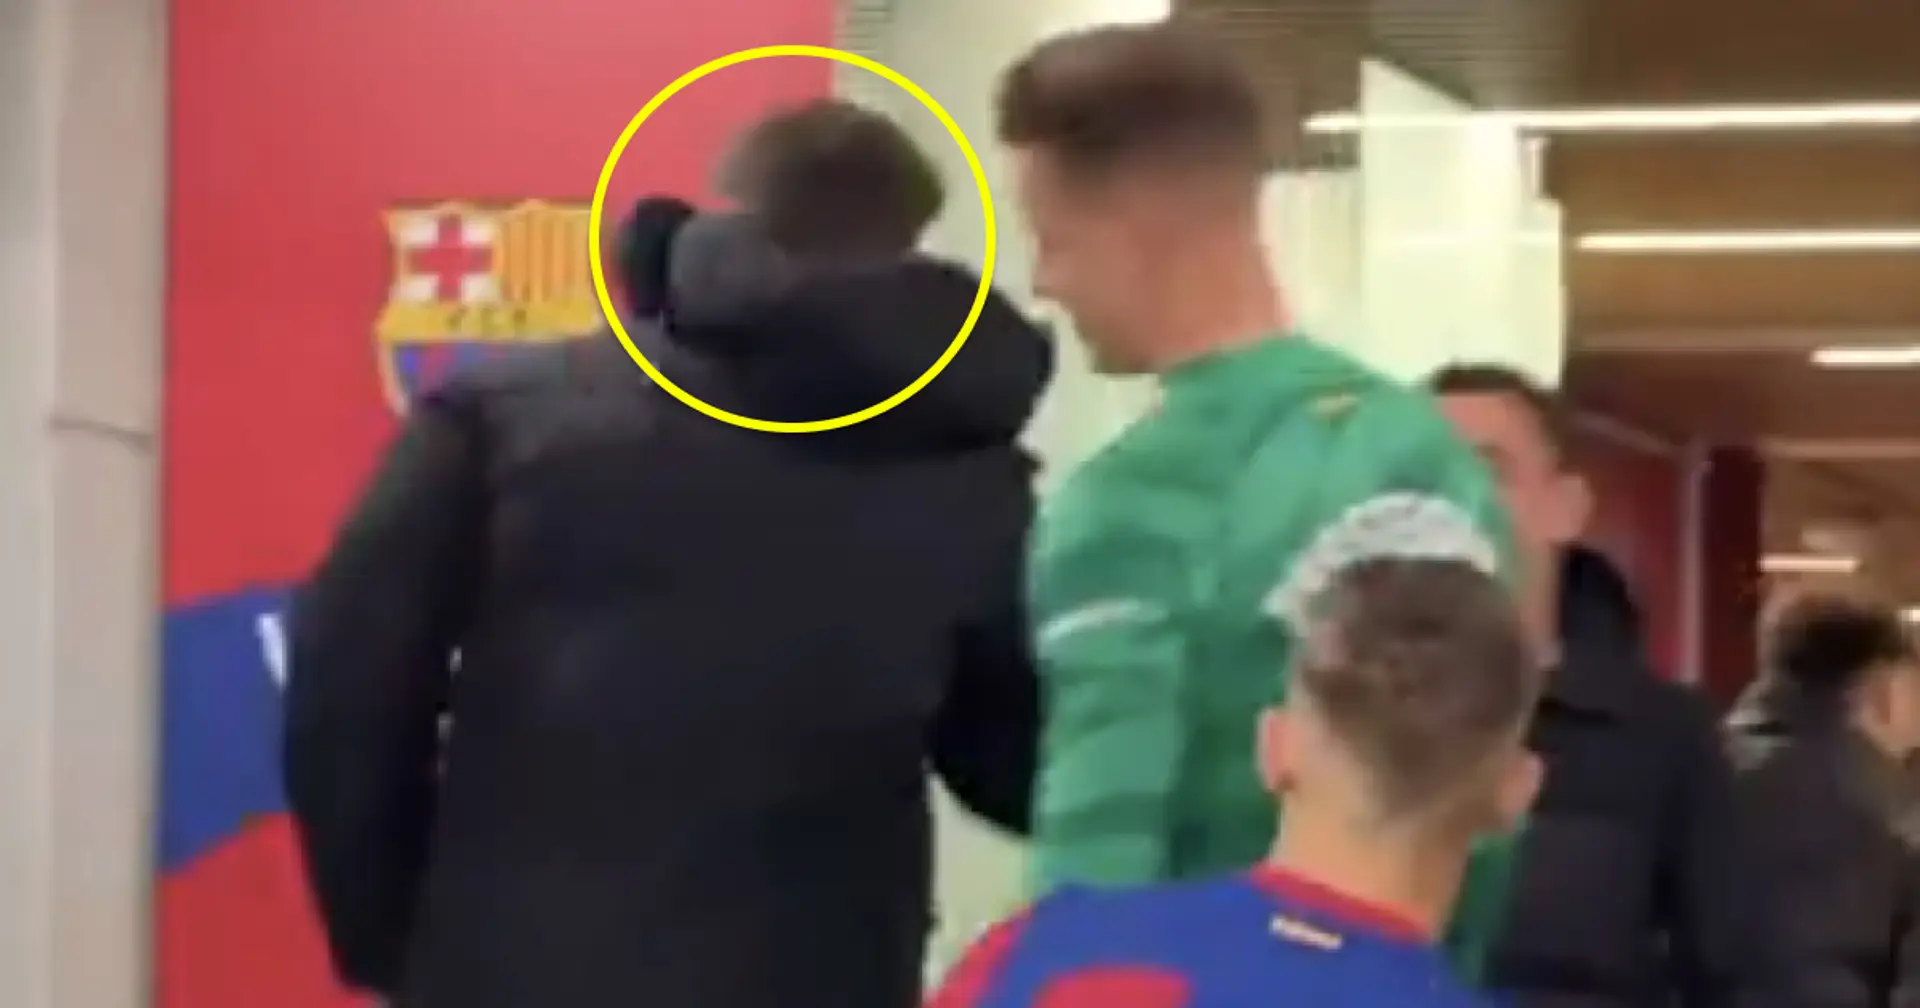 Retired Barca legend spotted heading to locker room after Las Palmas win